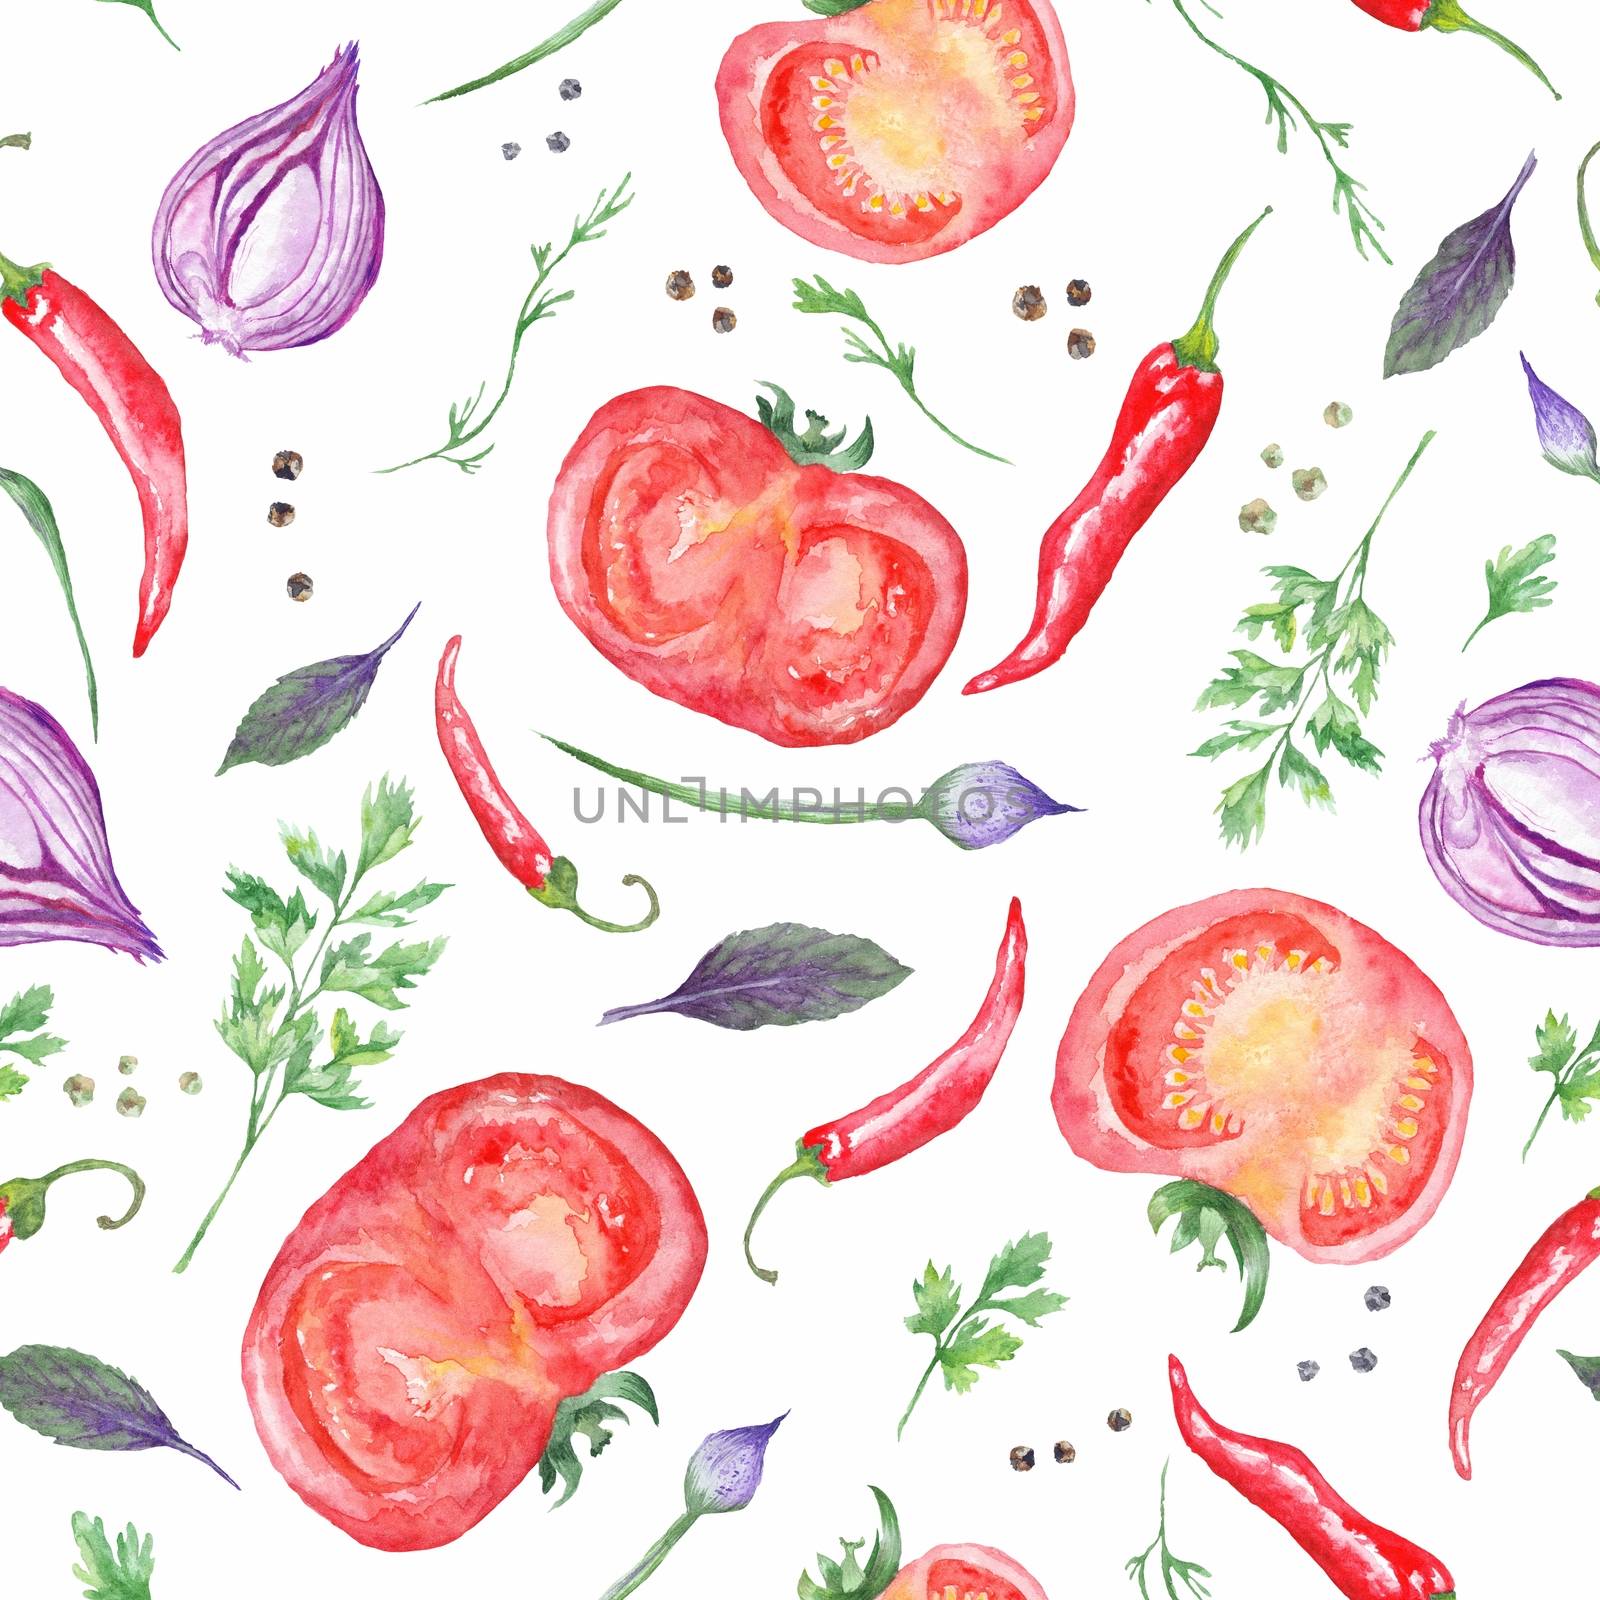 Seamless vegetable pattern with tasty italian food for kitchen and menu design